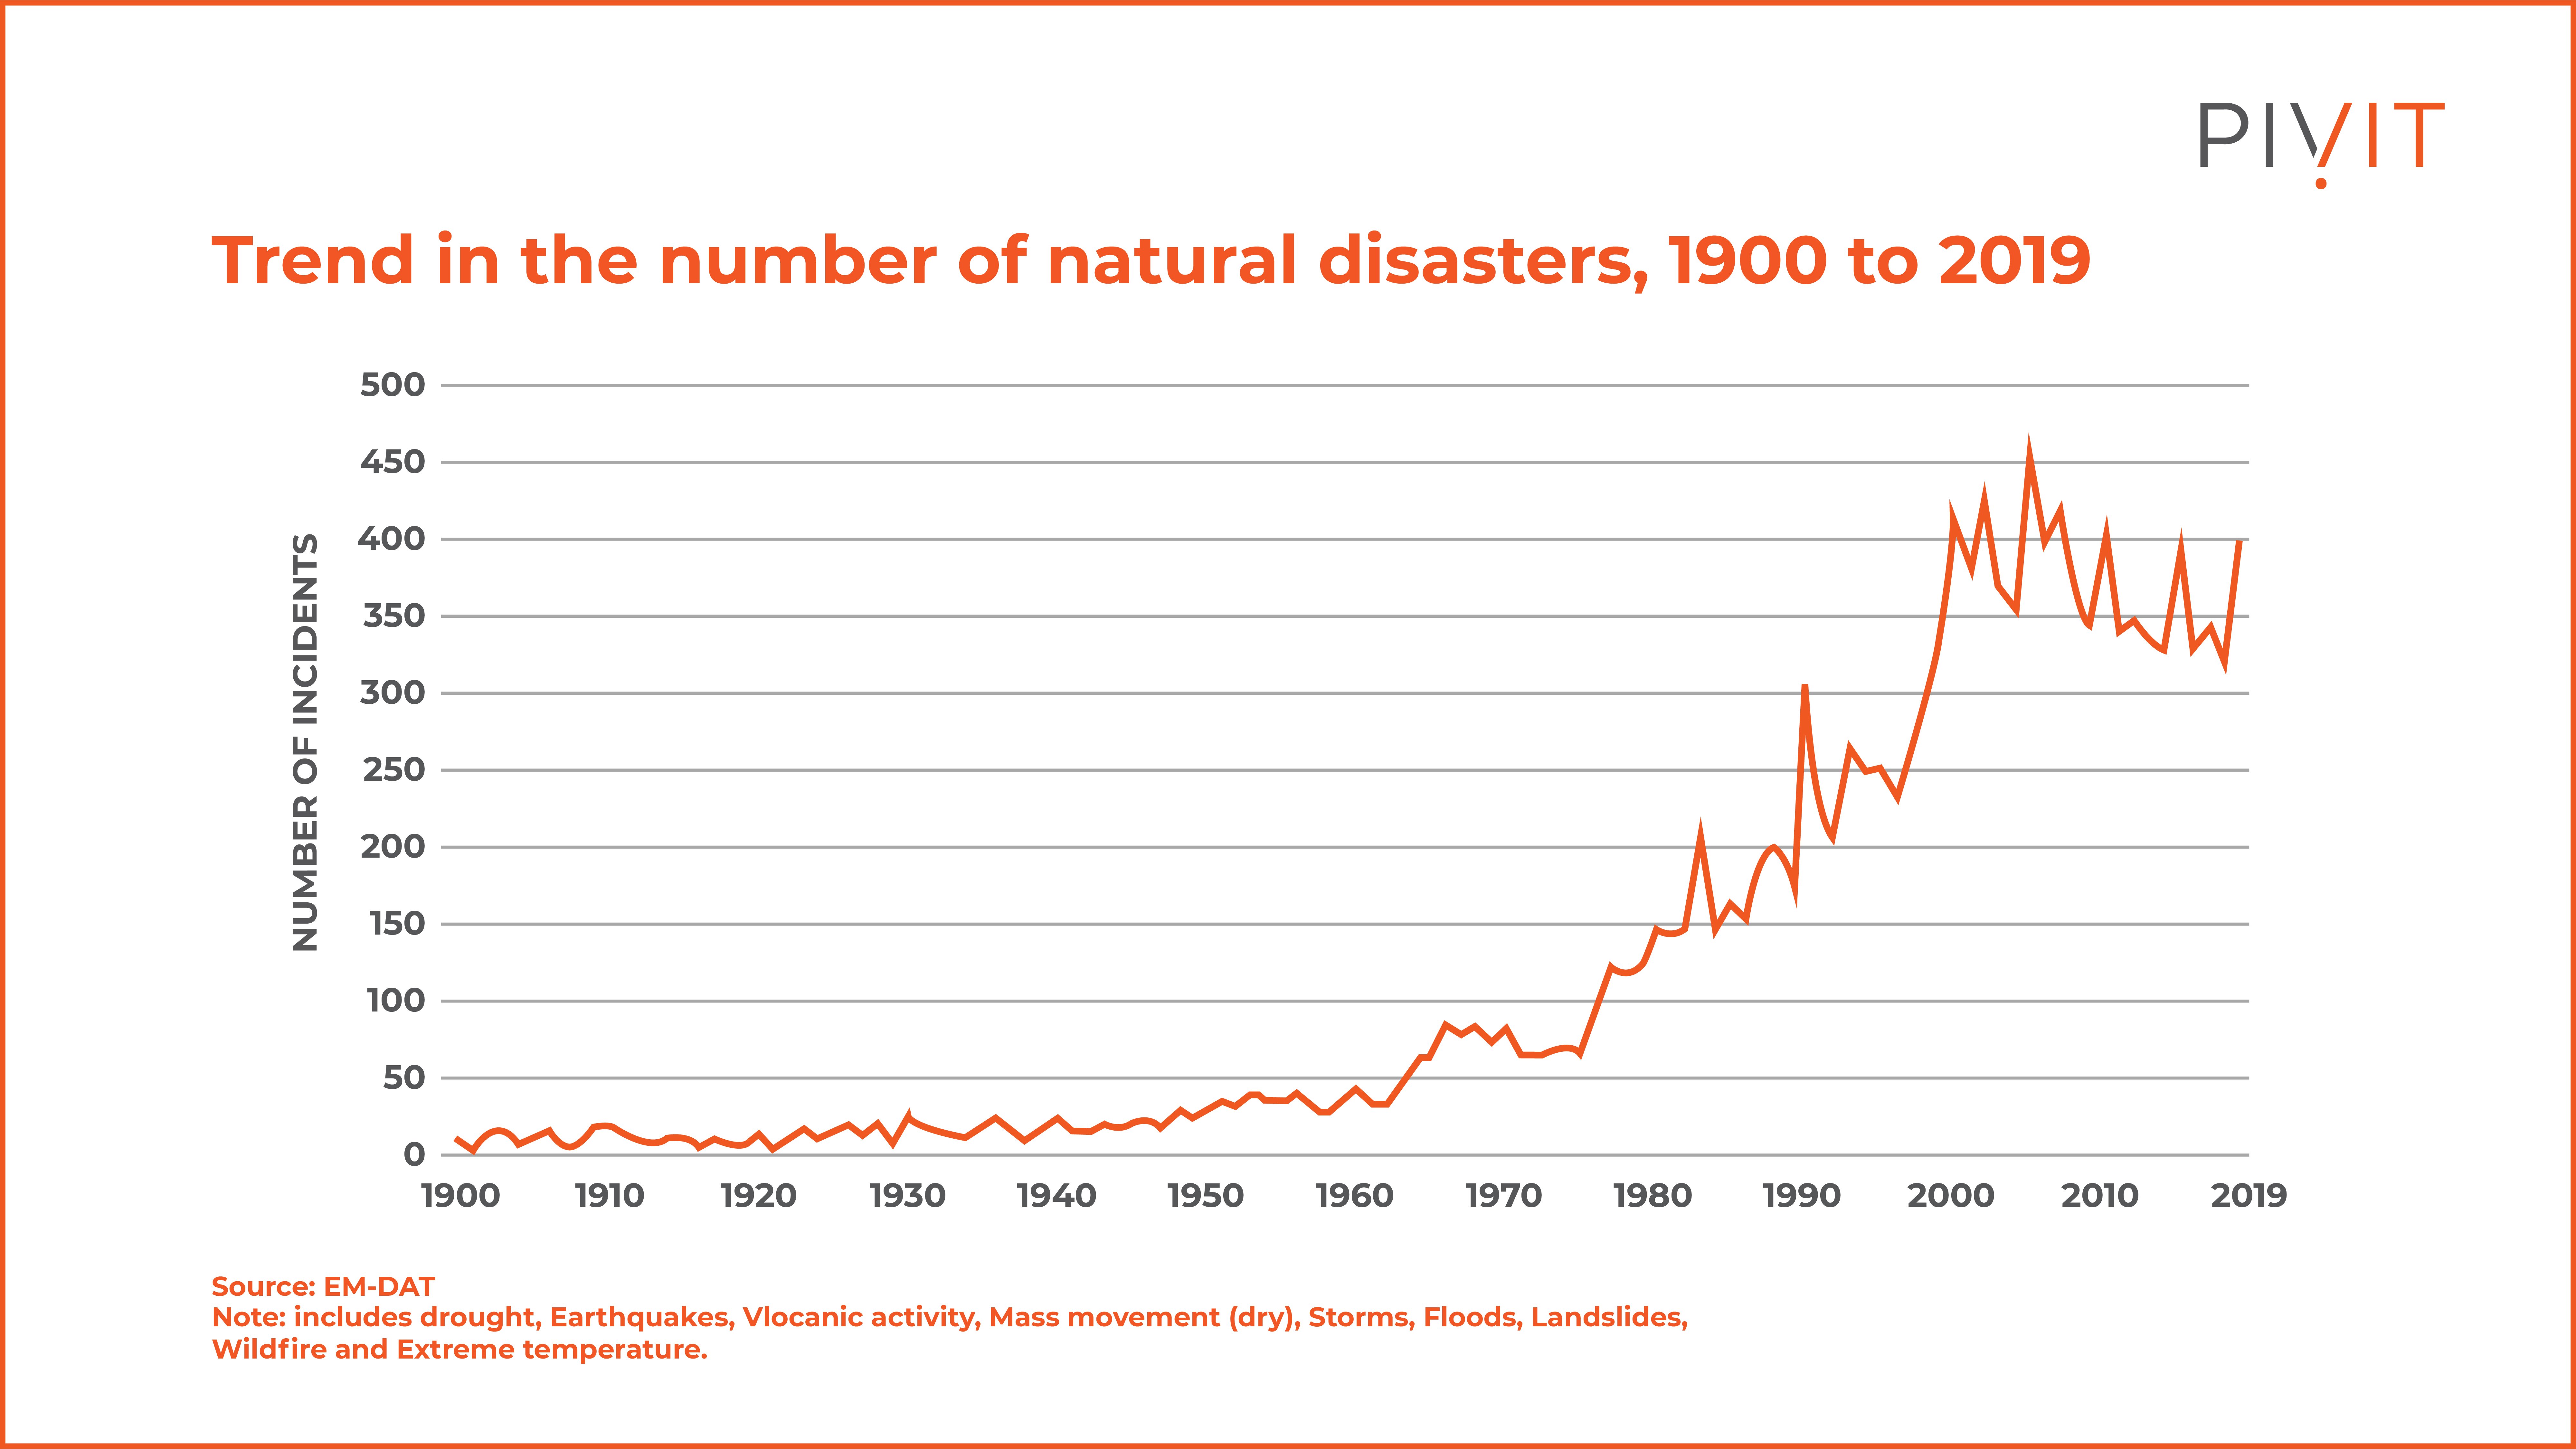 Trend in the number of natural disasters from 1900 to 2019